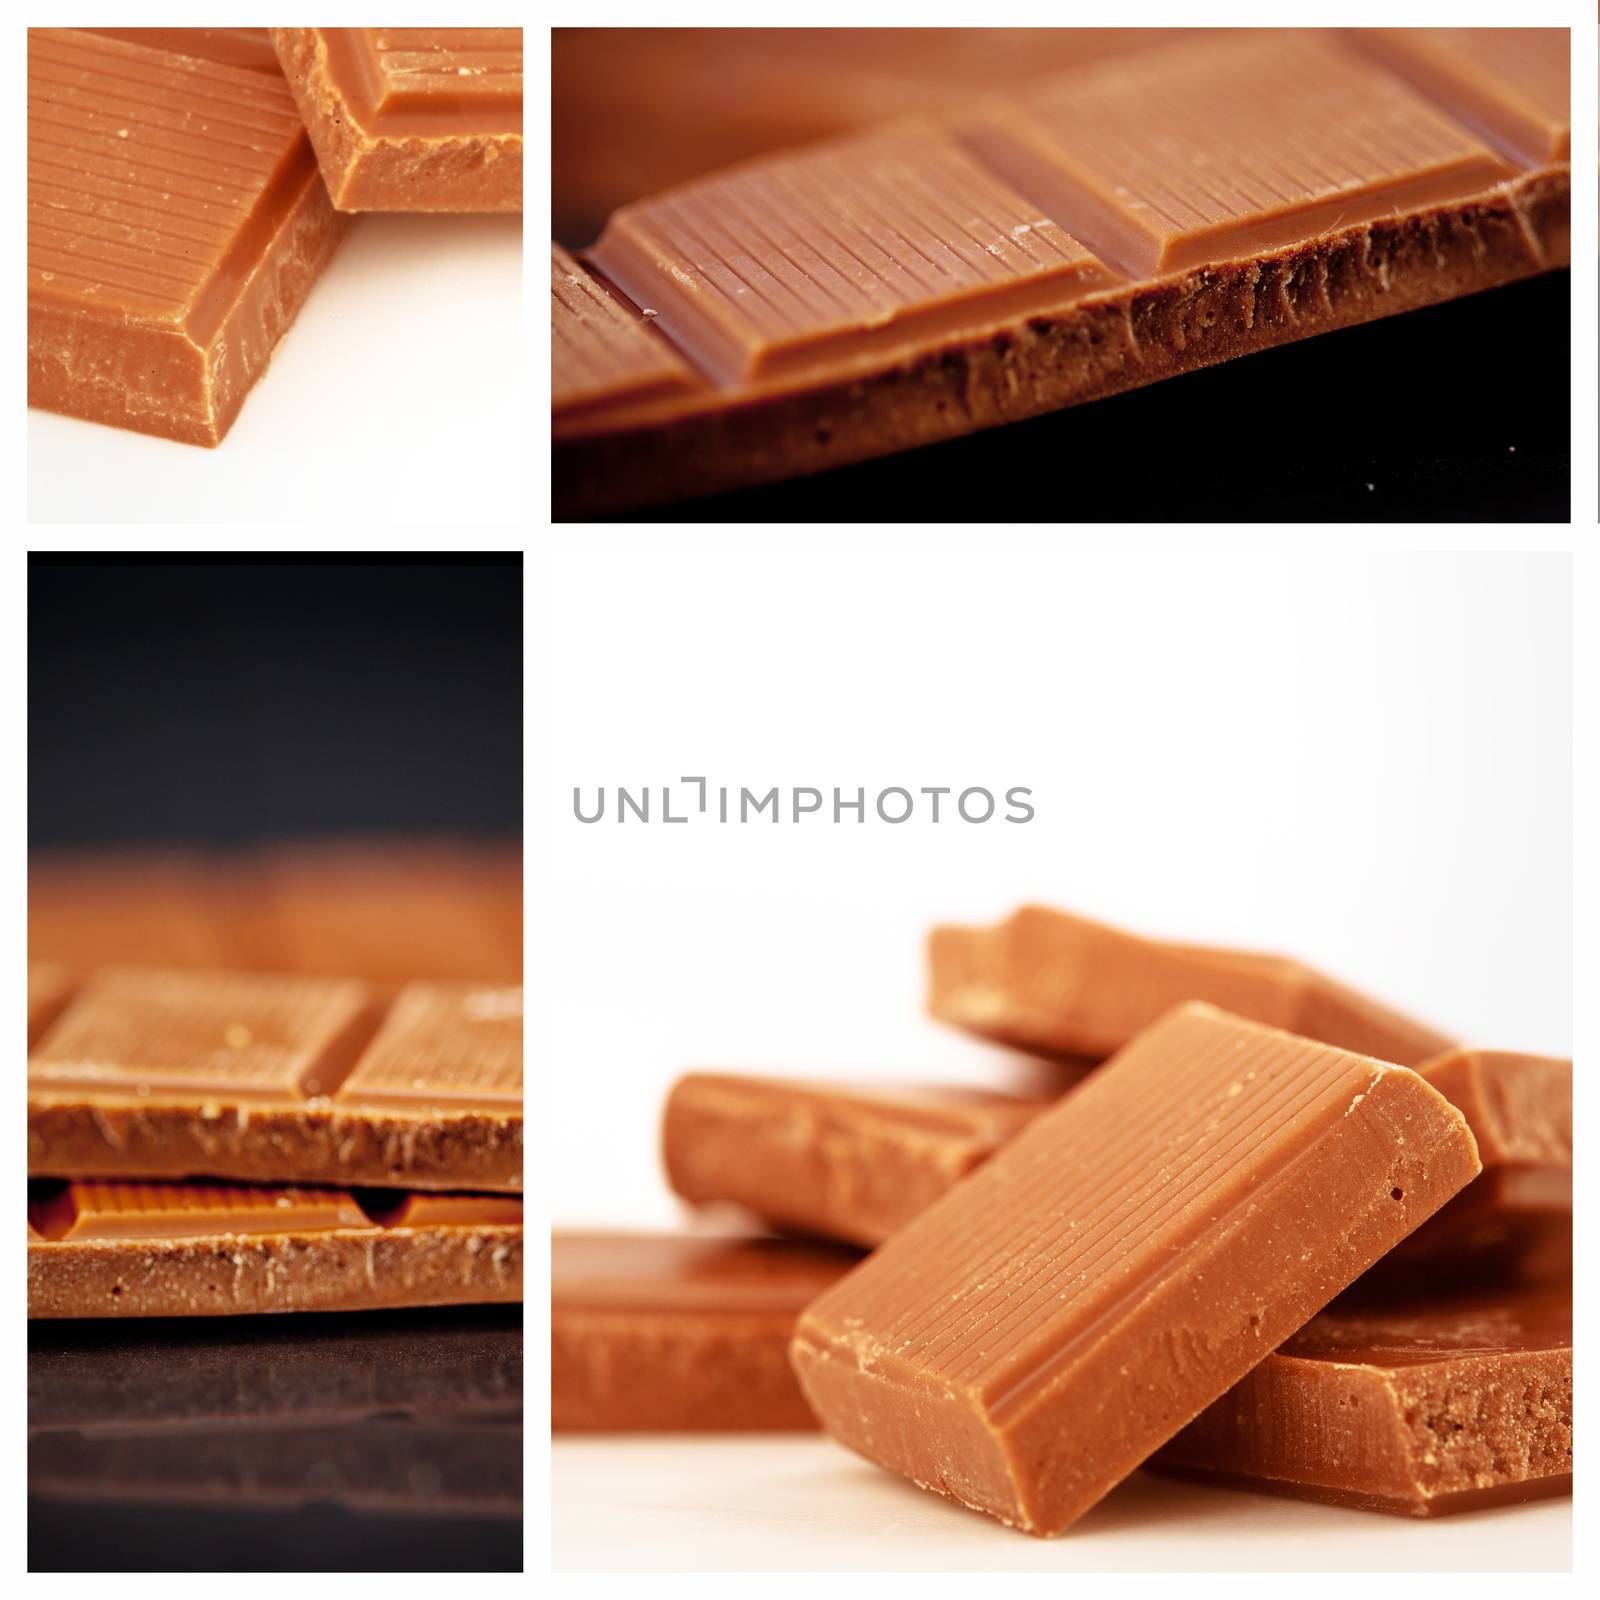 Two pieces of milk chocolate against chocolate pieces piled together